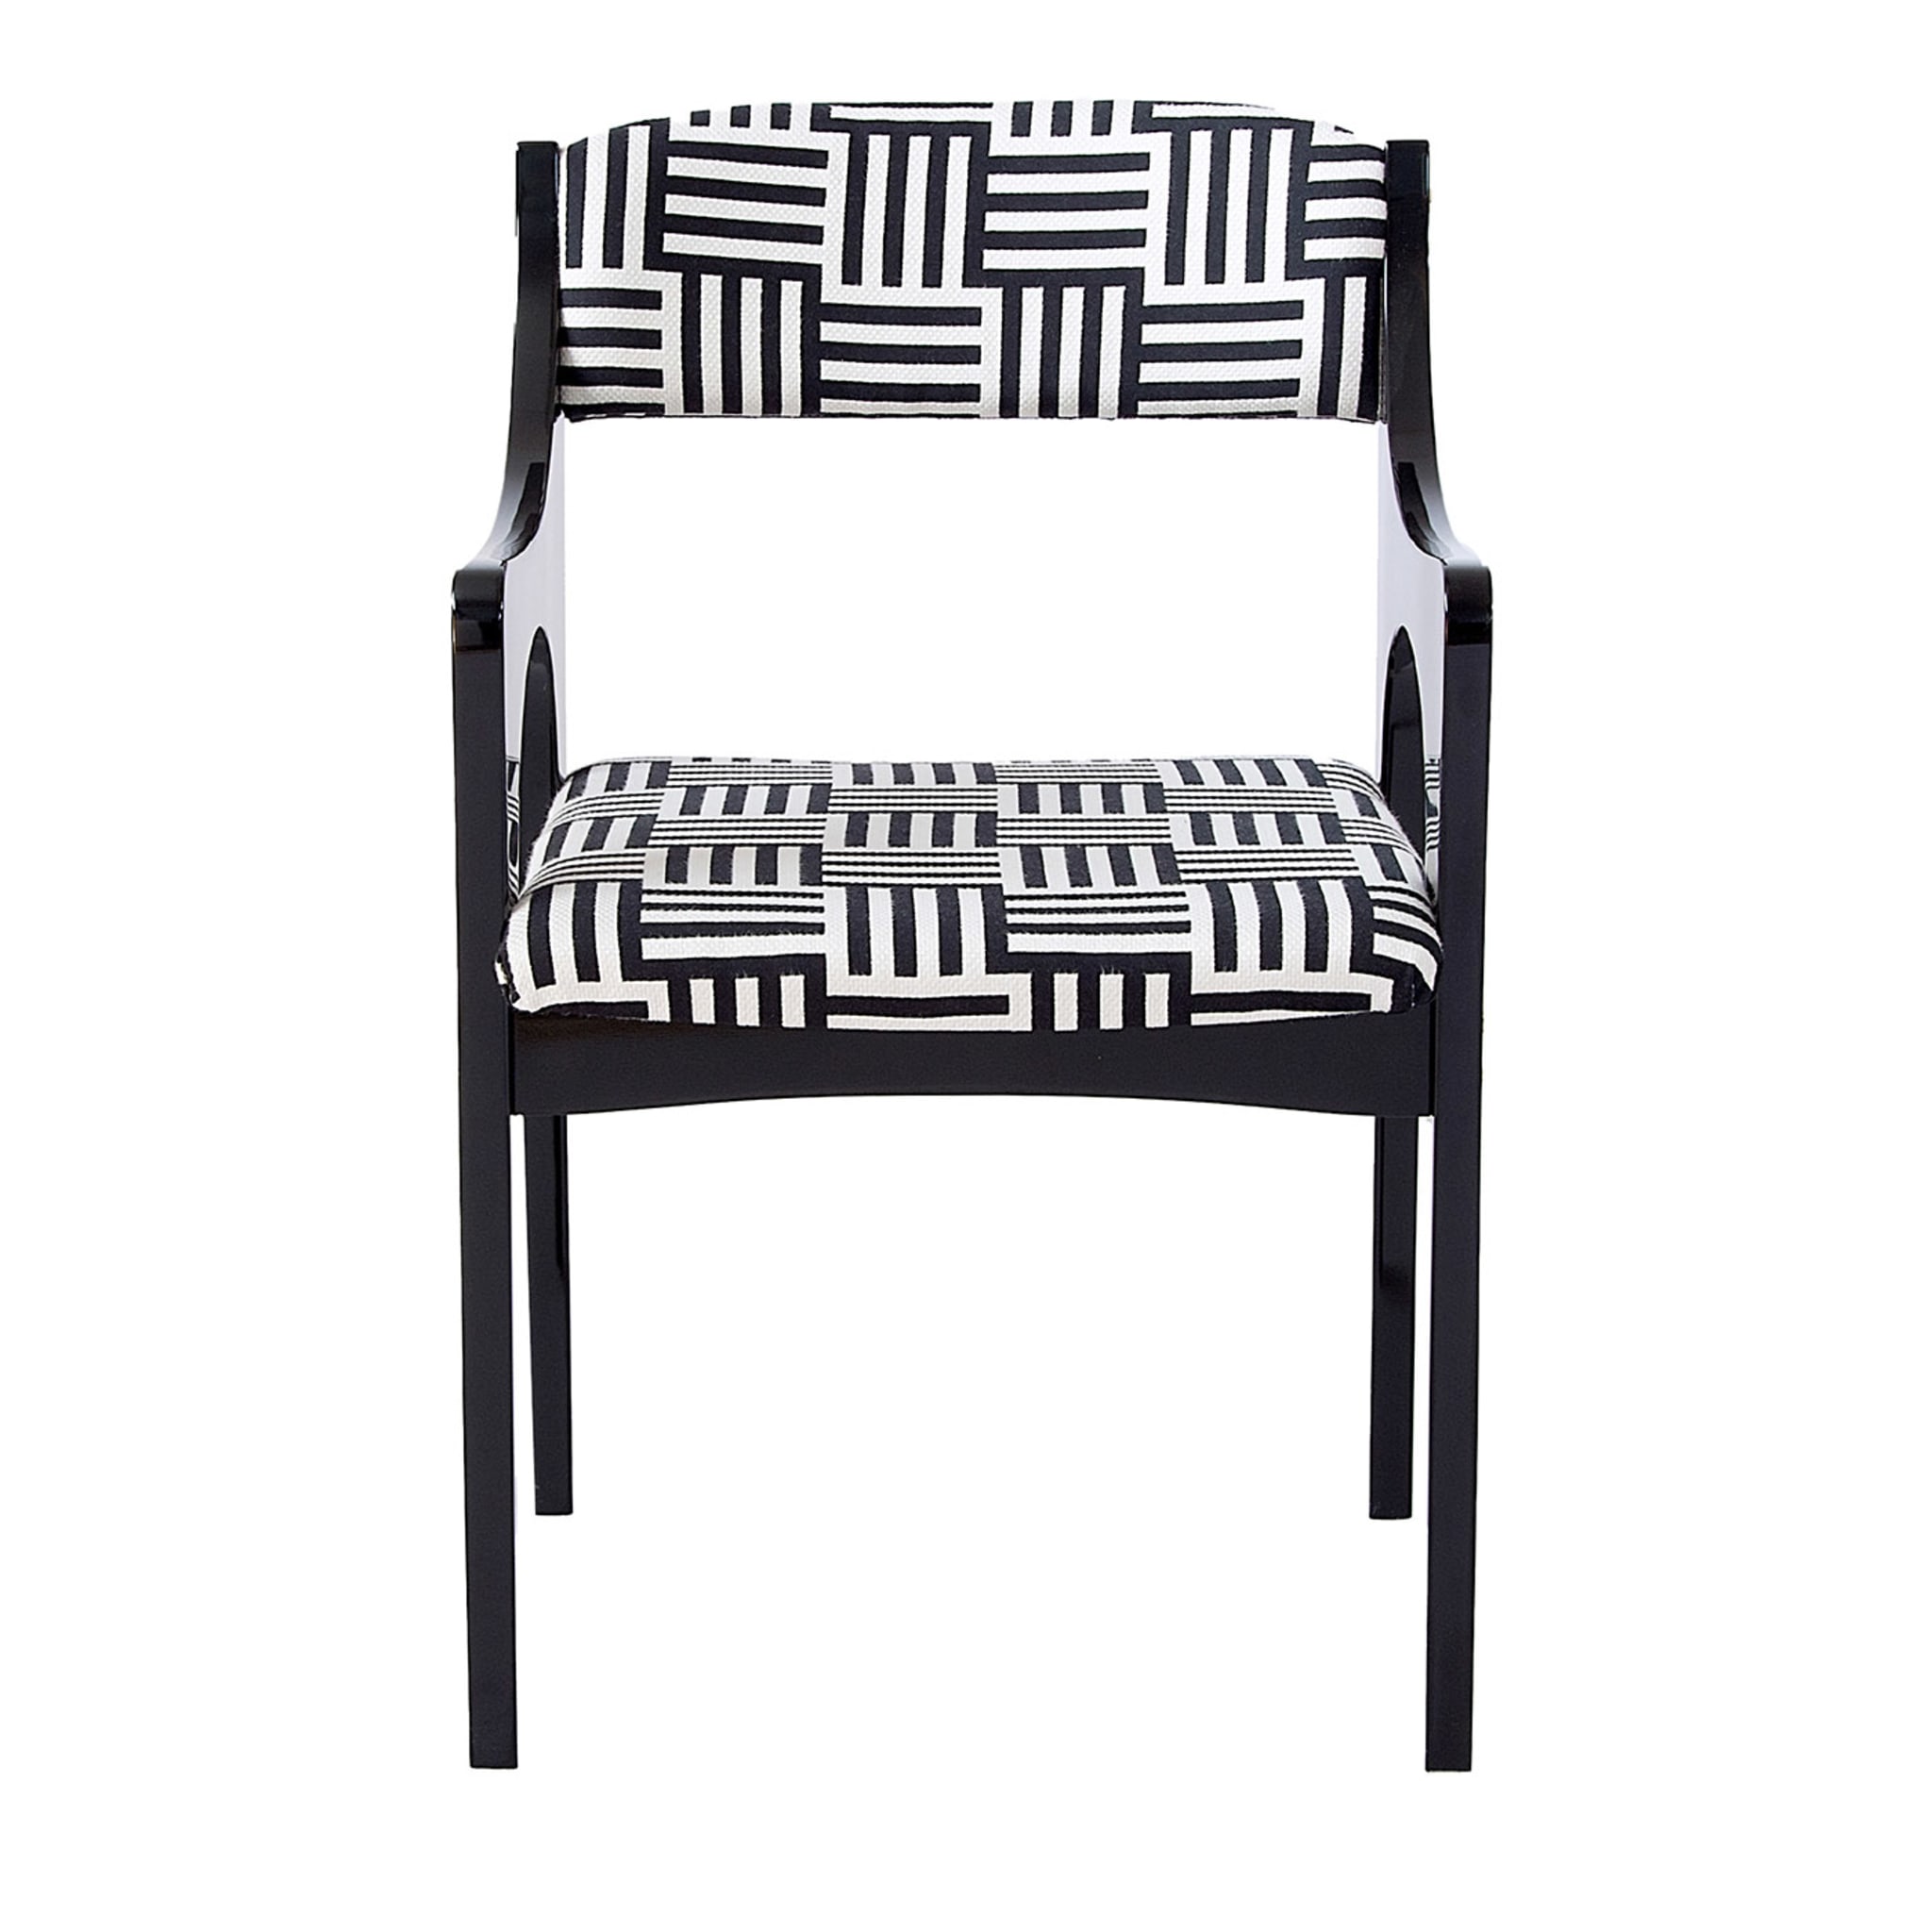 Lola 50's-Inspired Black & White Chair With Arms - Main view